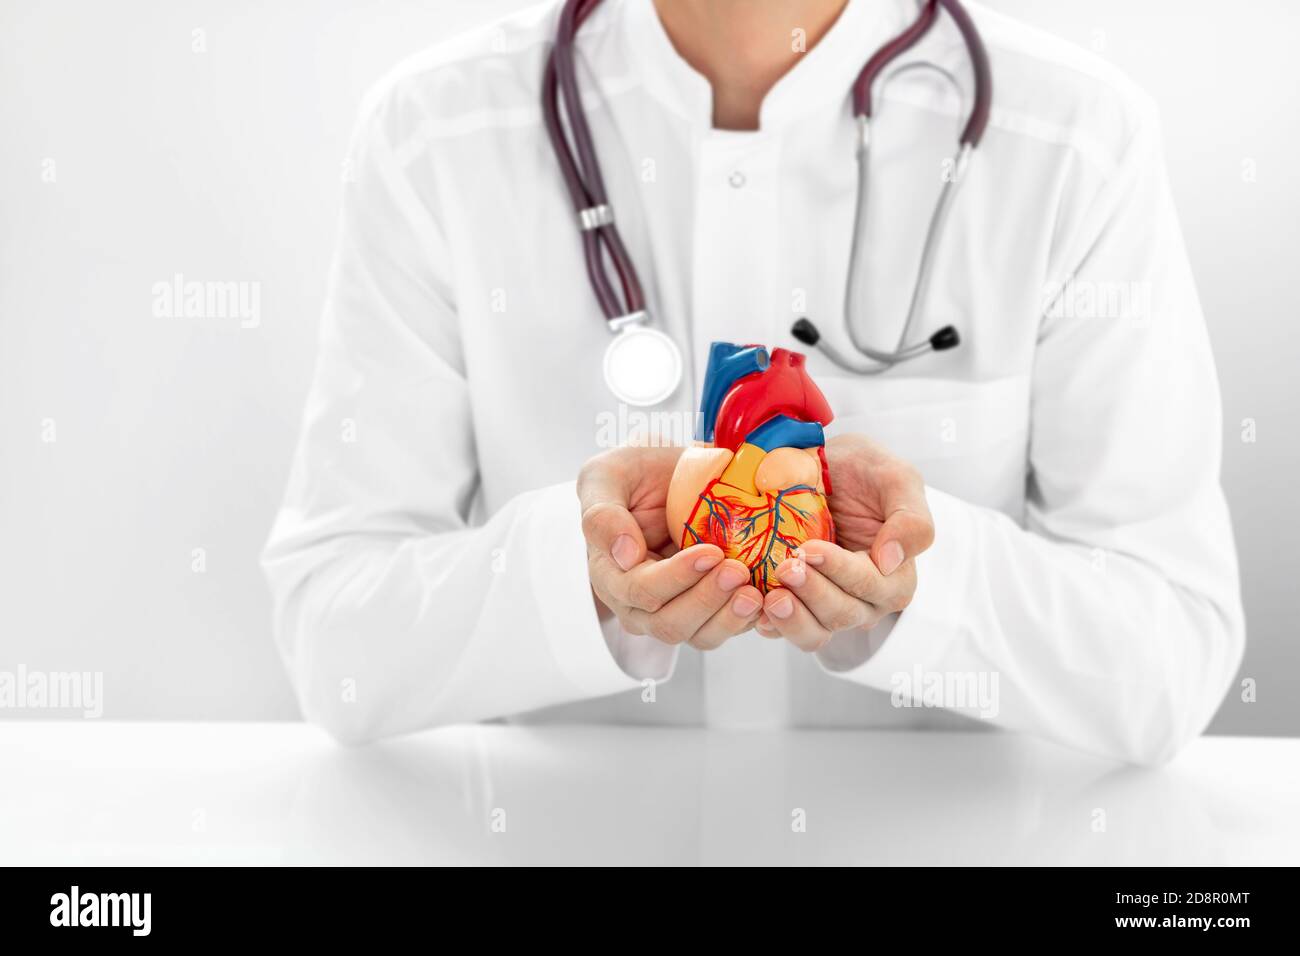 Cardiologist with stethoscope holding a model heart in hands. medical support for human cardiac health Stock Photo